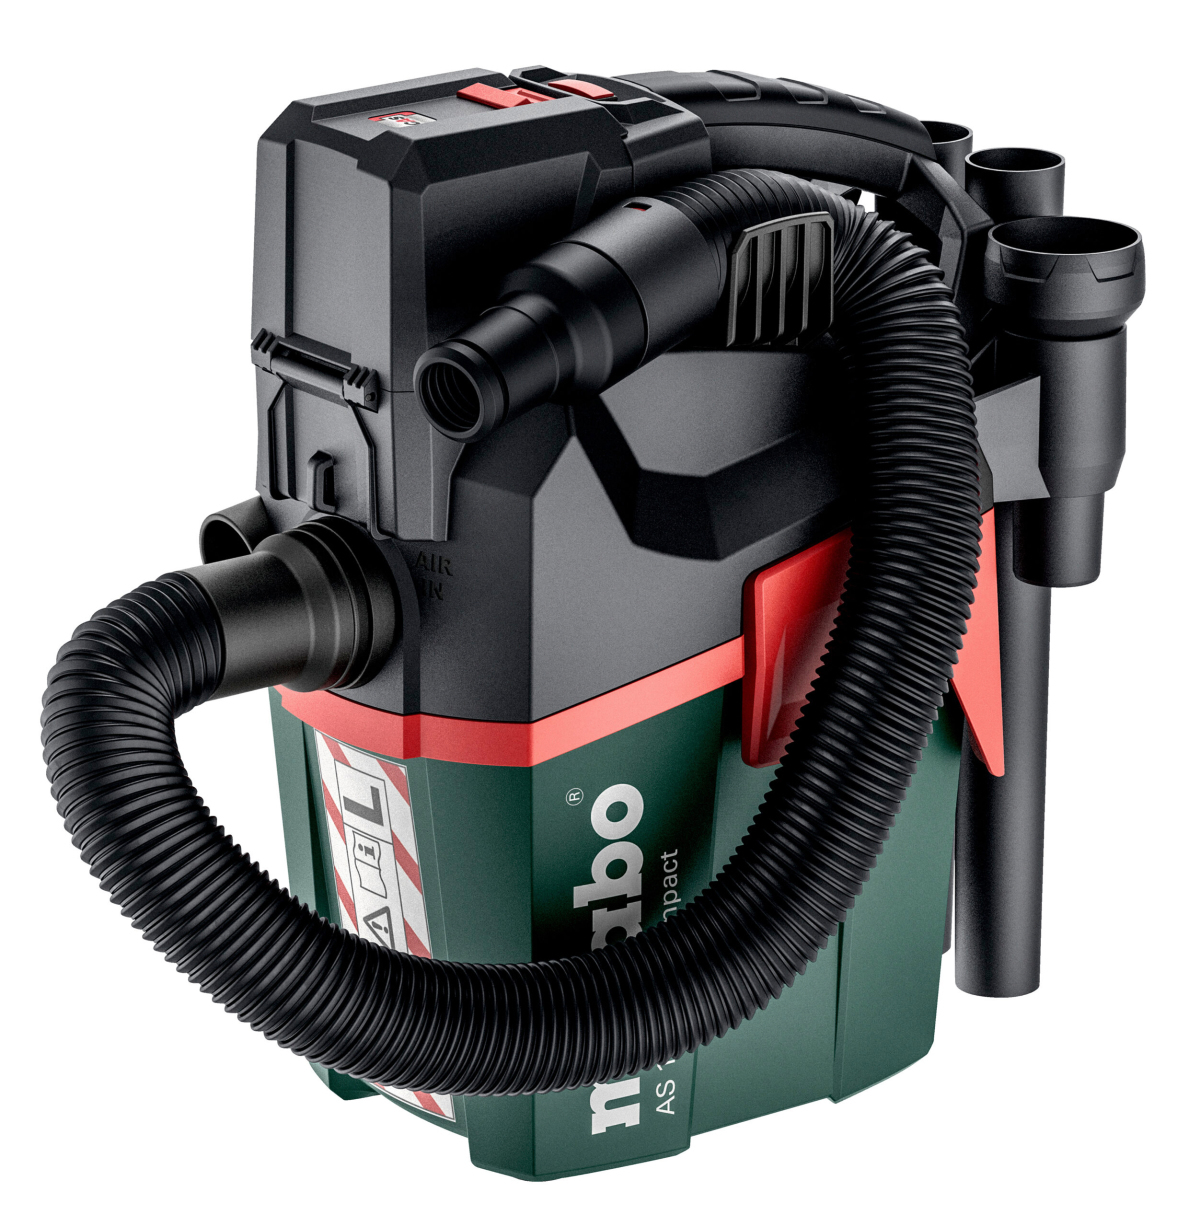 02-Metabo-AS-18-L-PC-compact-saubere-und-staubarme-Arbeitsumgebung-scaled.jpg